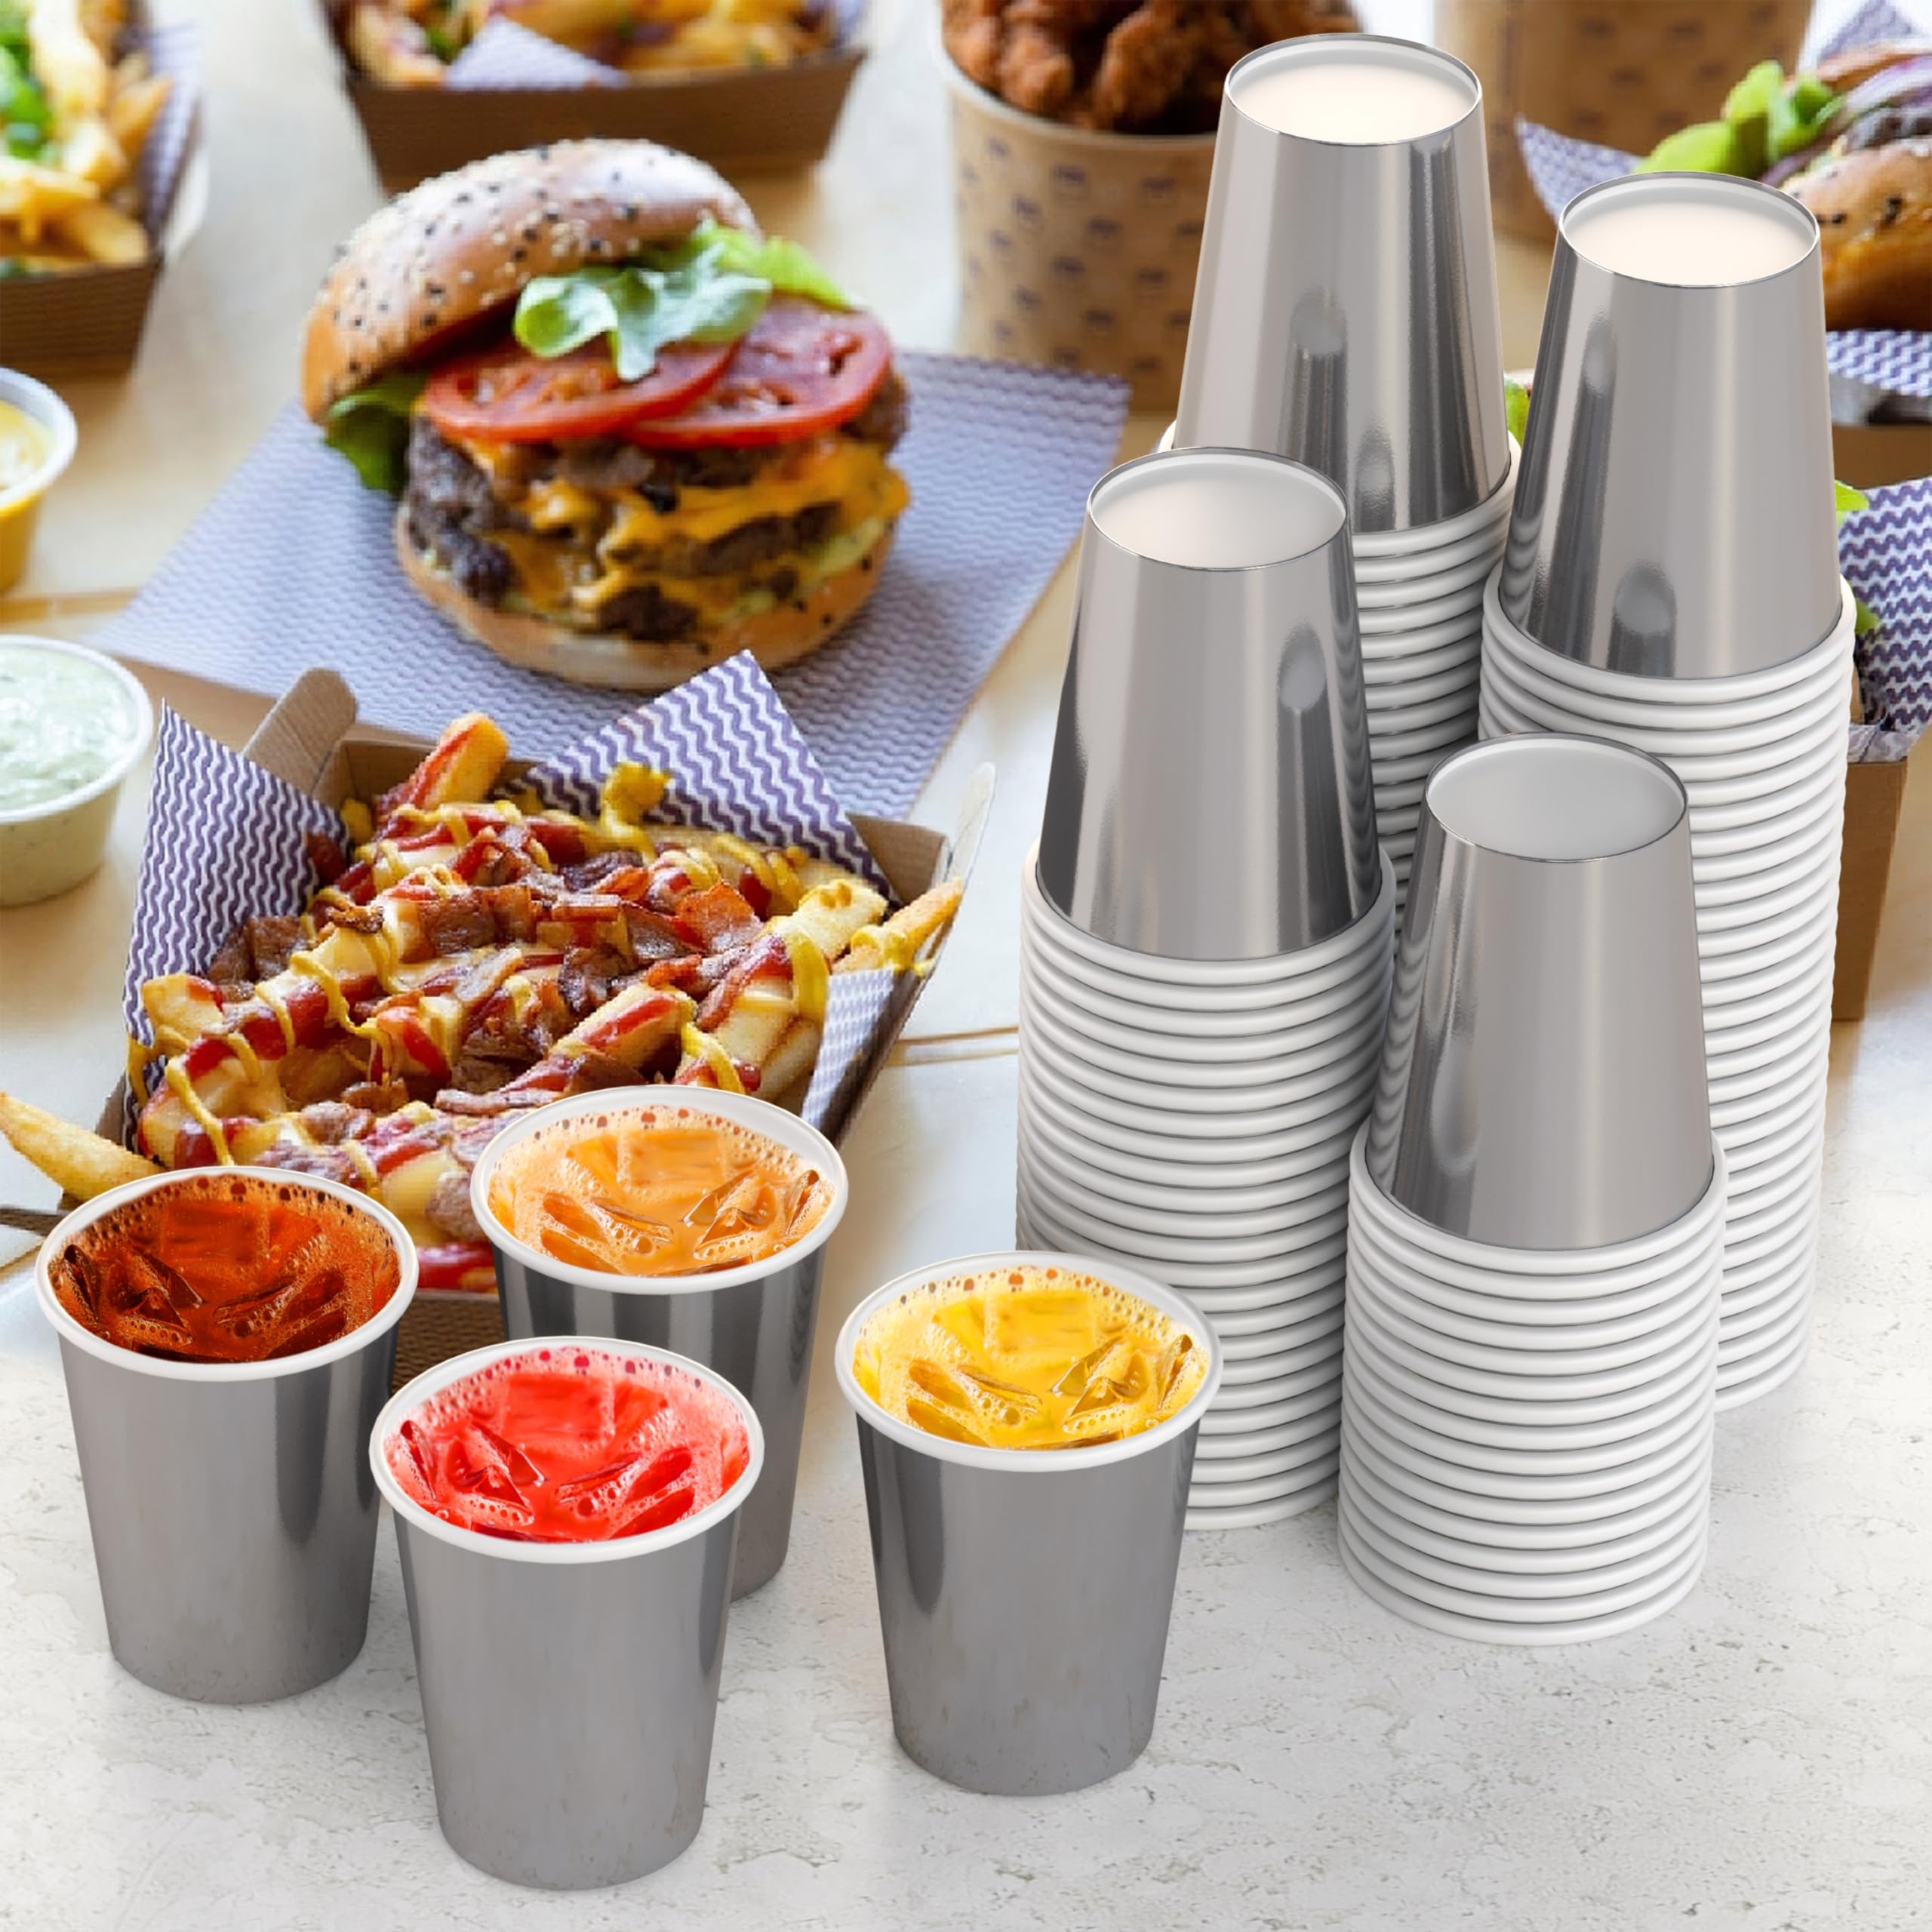 9 Oz. Metallic Silver Paper Cups | 100 Count